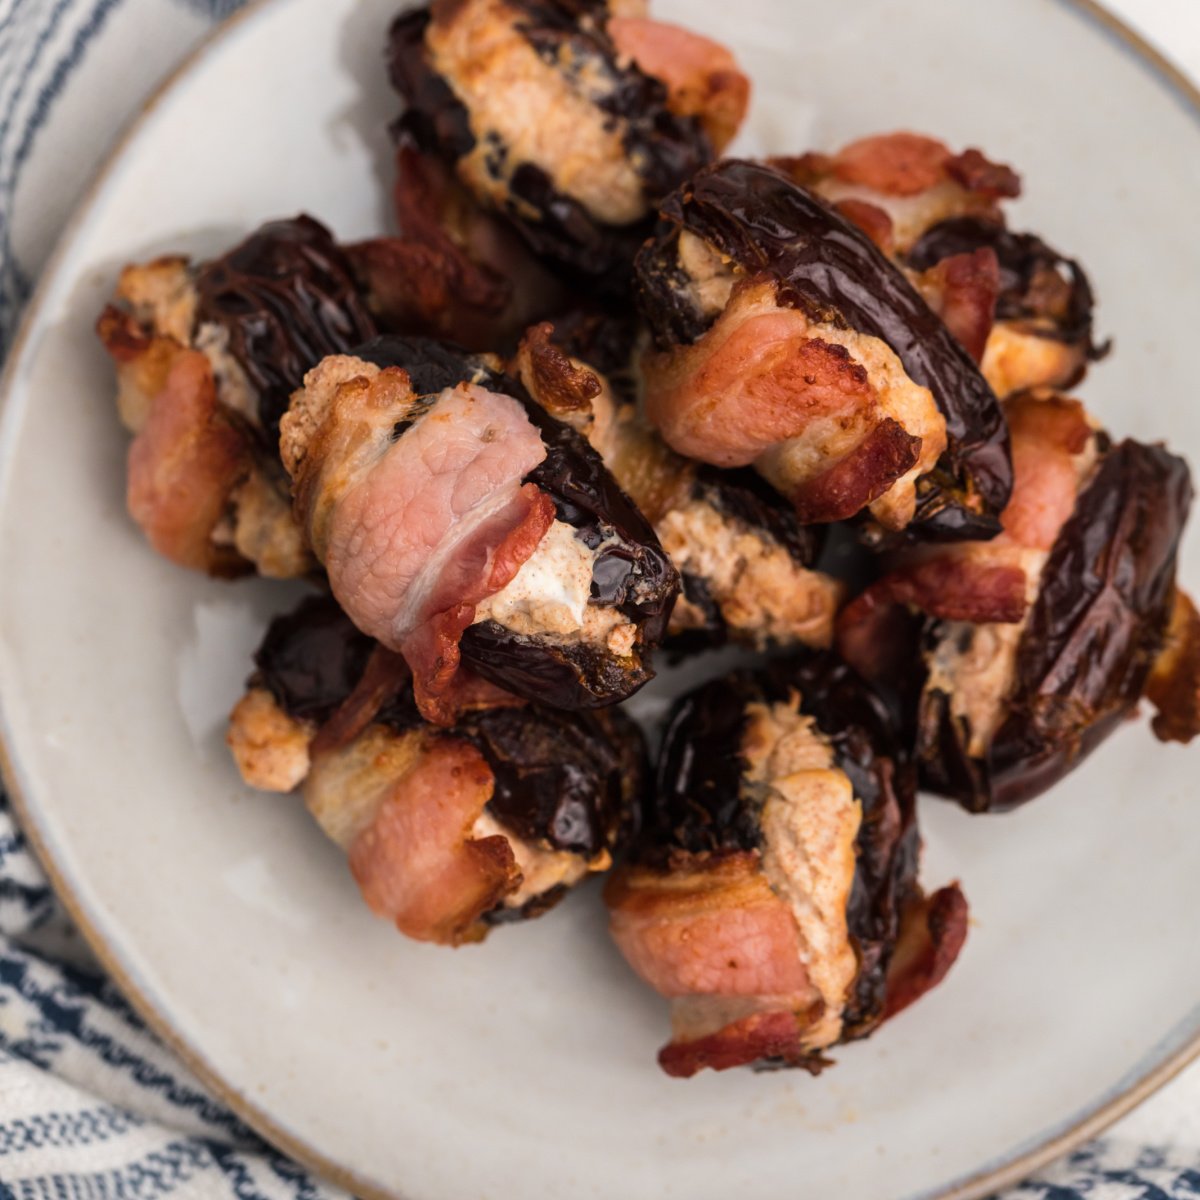 Cream cheese stuffed air fryer bacon wrapped dates.